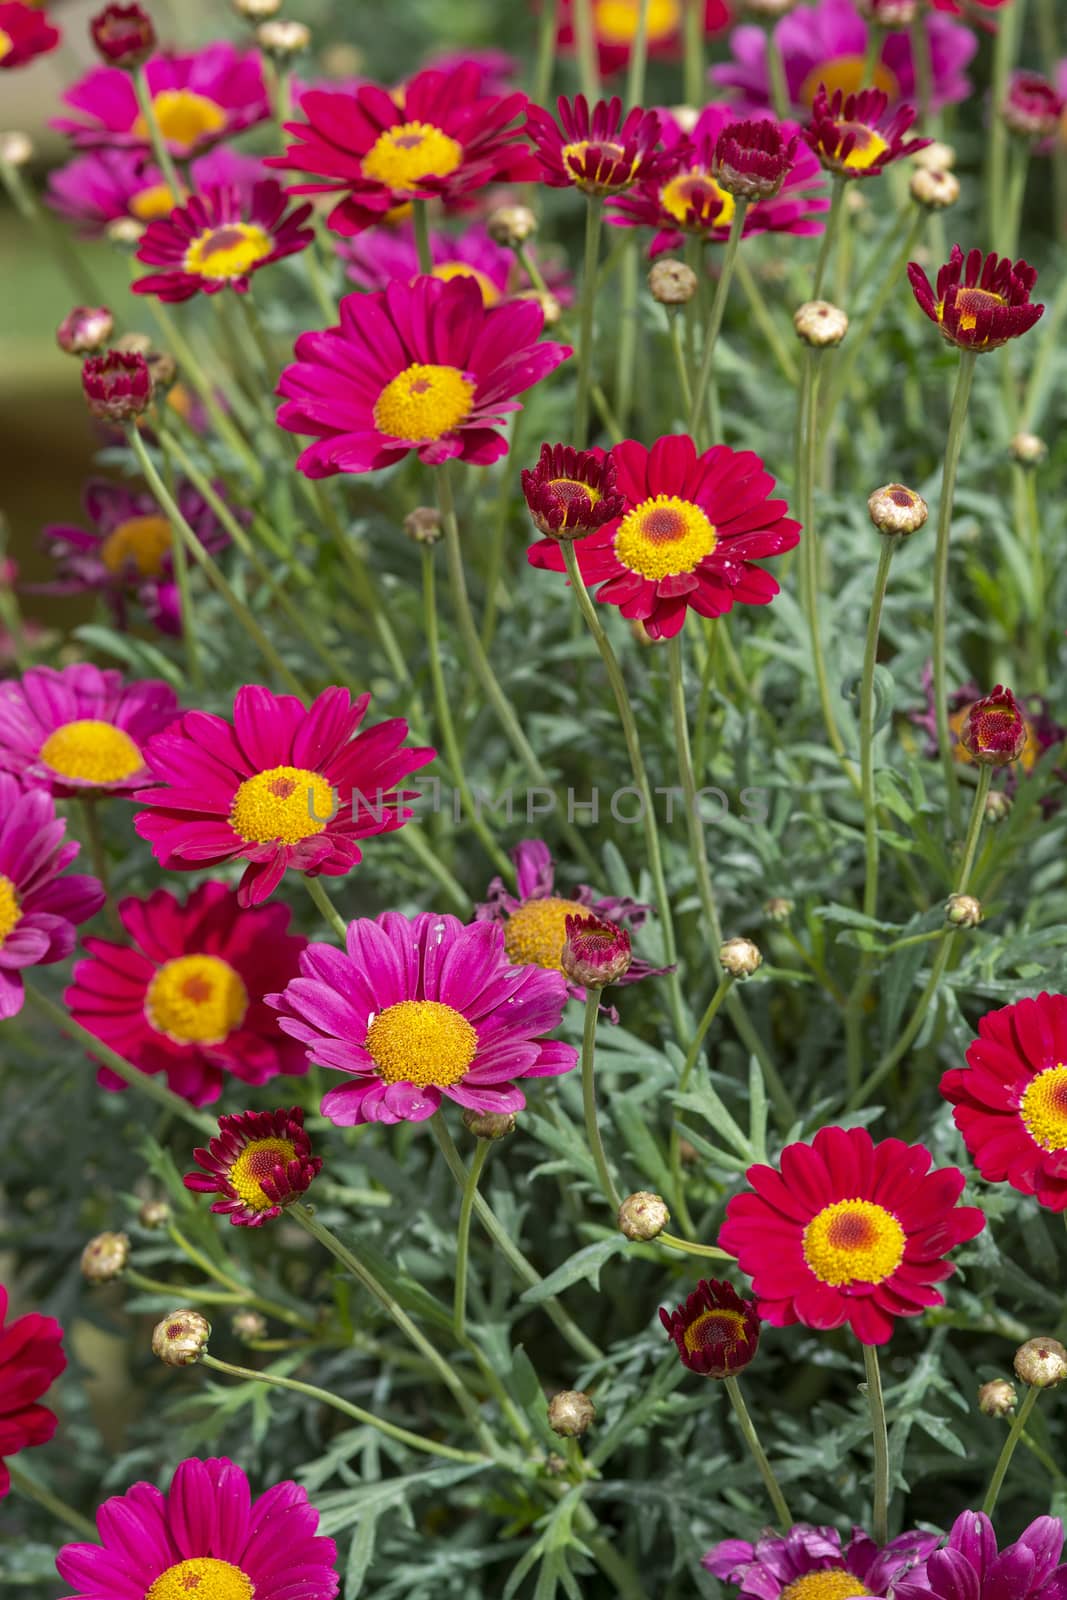 Full frame of pink and red daisy looking flowers full frame summer garden